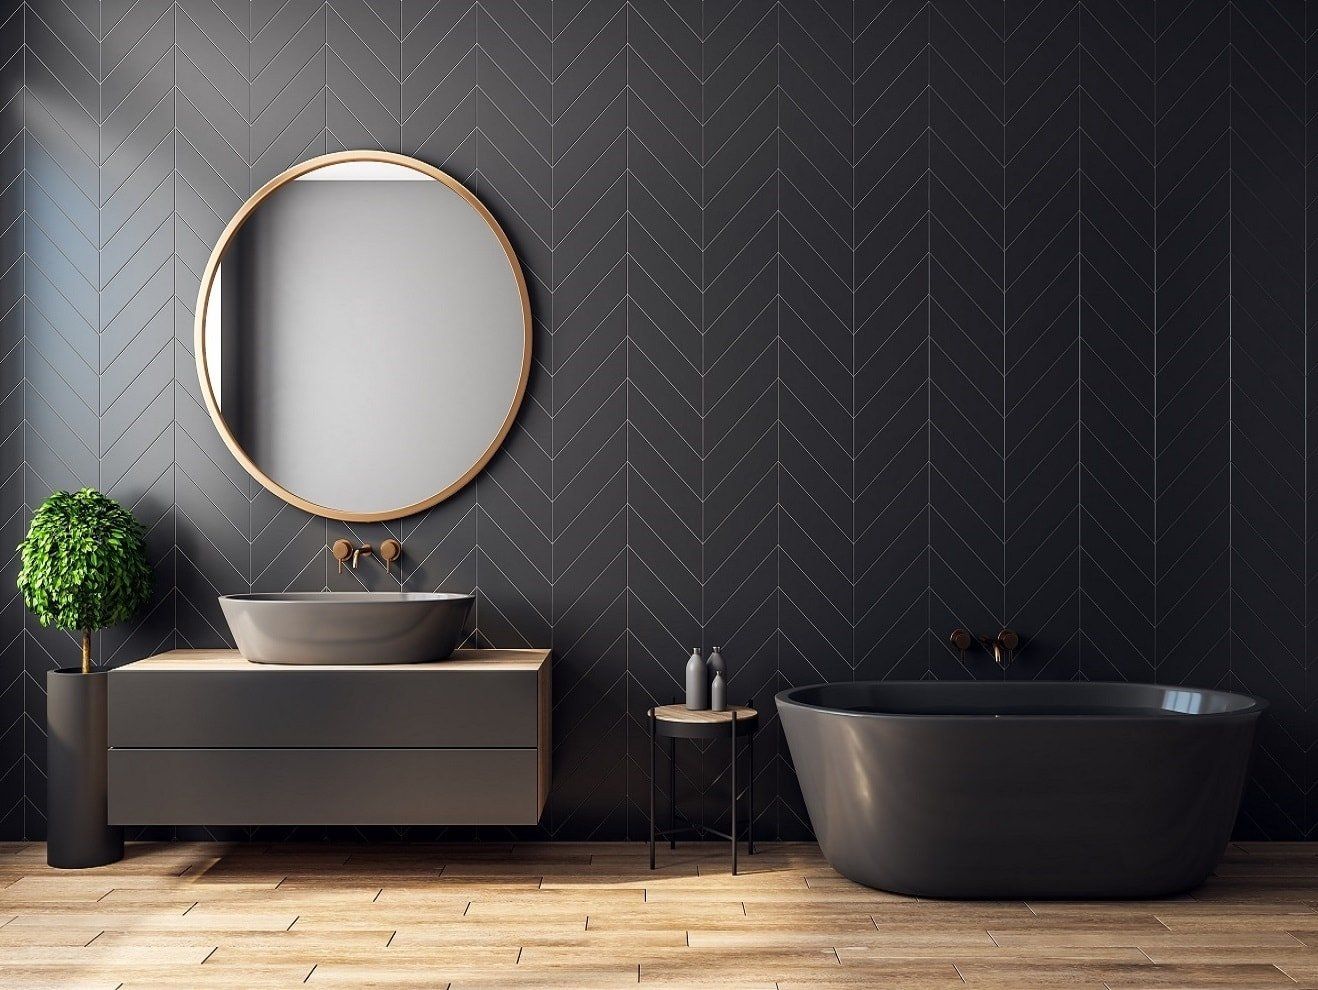 Newly renovated bathroom with an elegant dark grey theme for a residential home in Wollongong, NSW.